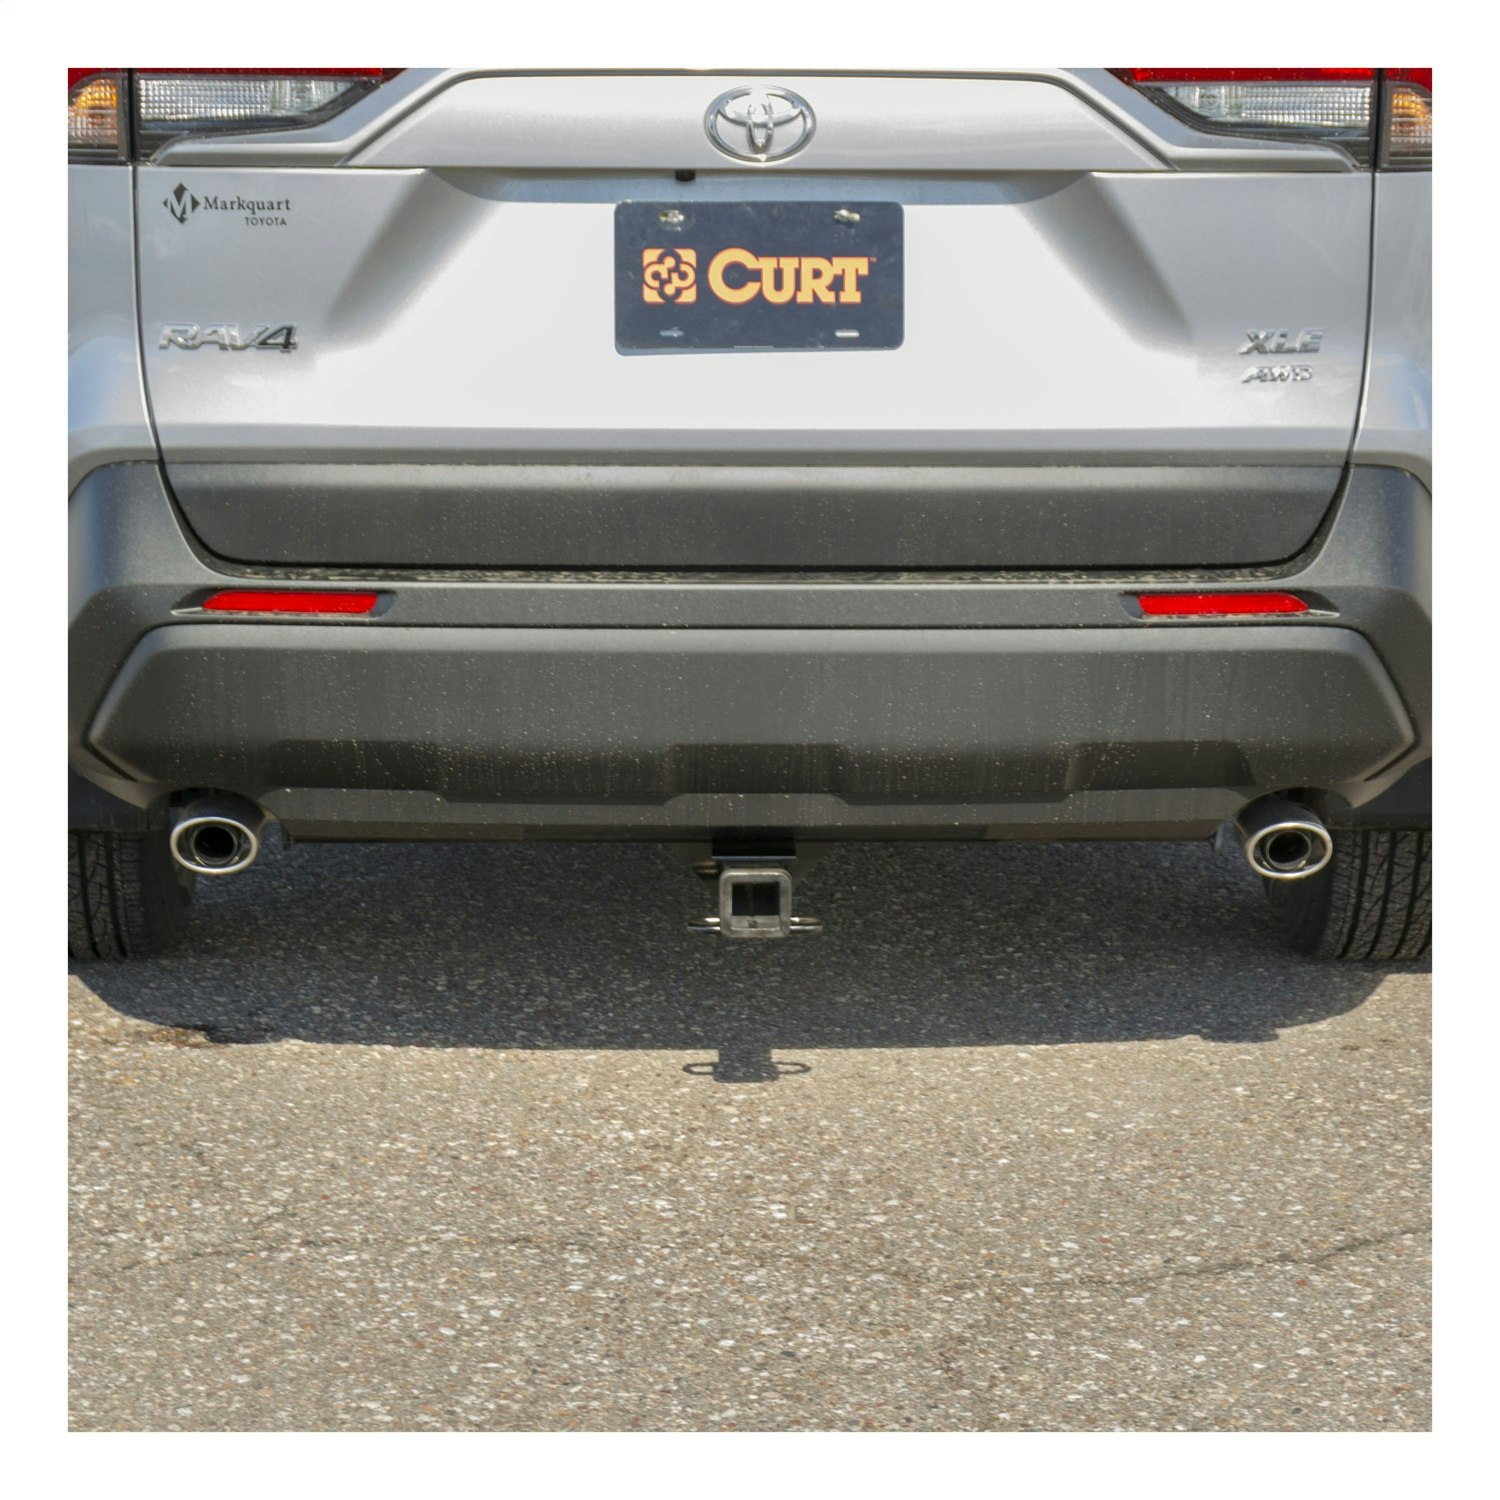 Curt 13416 Class 3 Trailer Hitch 2-Inch Receiver For 2019 Toyota RAV4 NEW